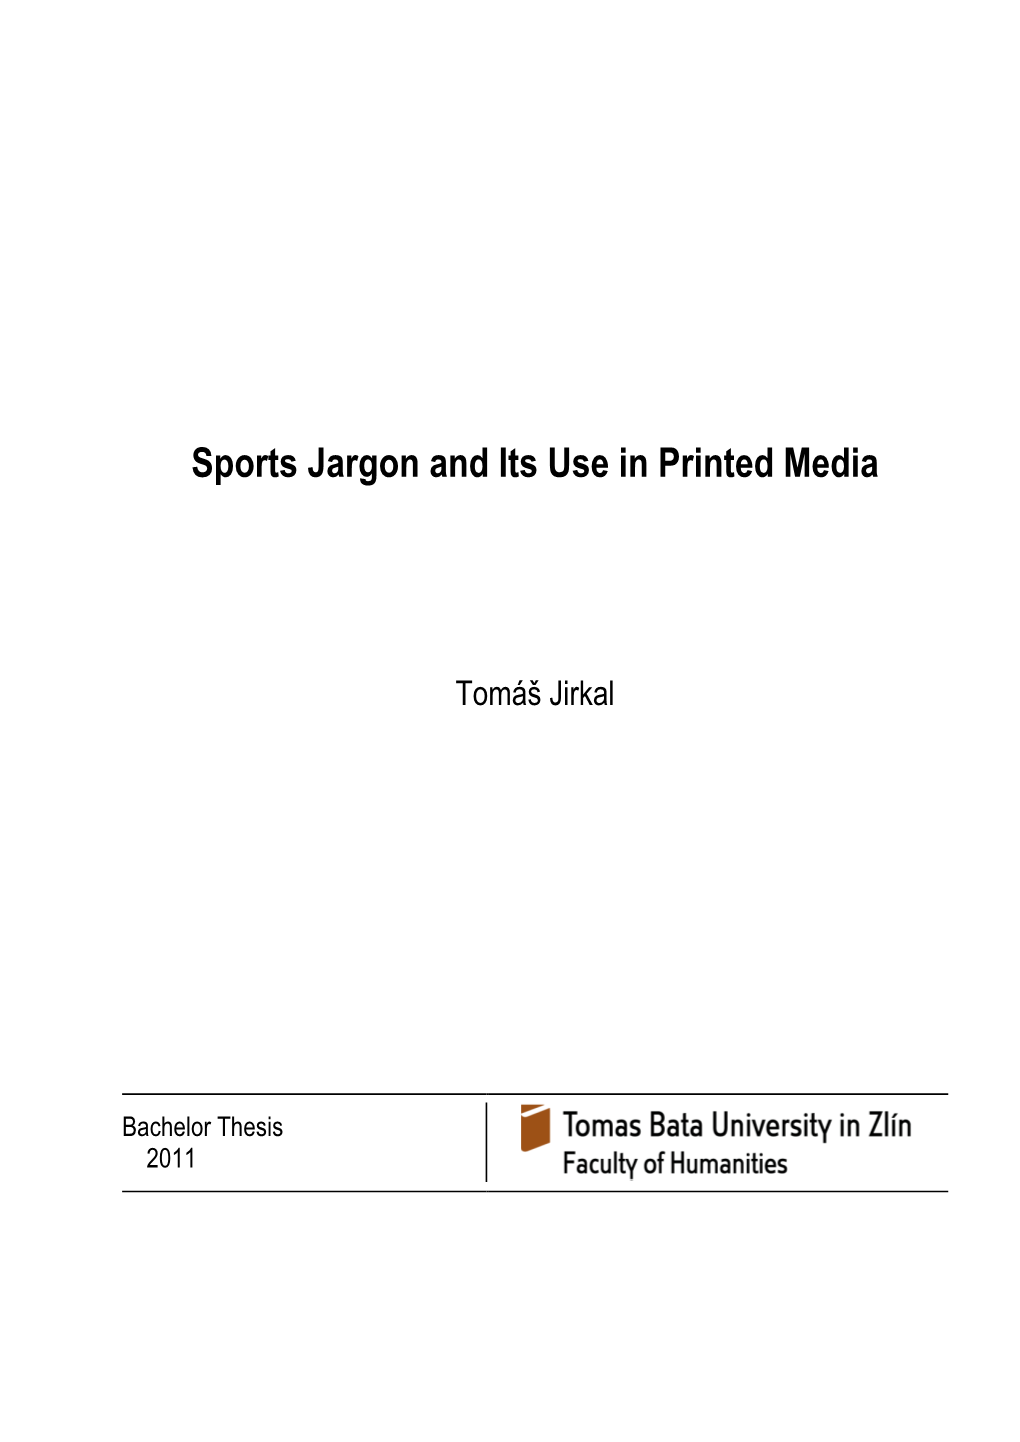 Sports Jargon and Its Use in Printed Media